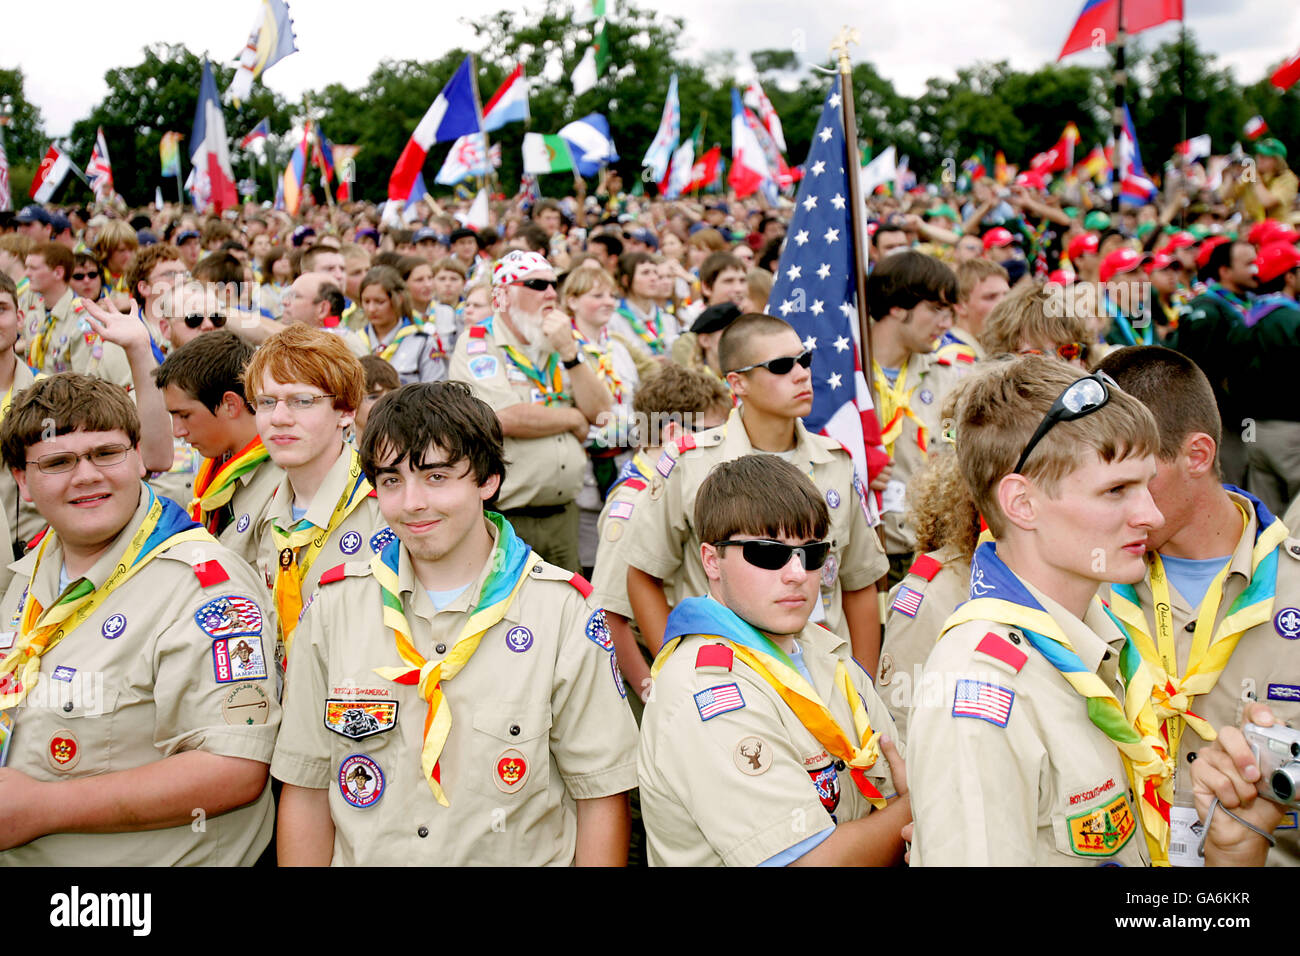 Scouts attend the opening ceremony for the 21st World Scout Jamboree at Hylands Park, Chelmsford, Essex. Stock Photo